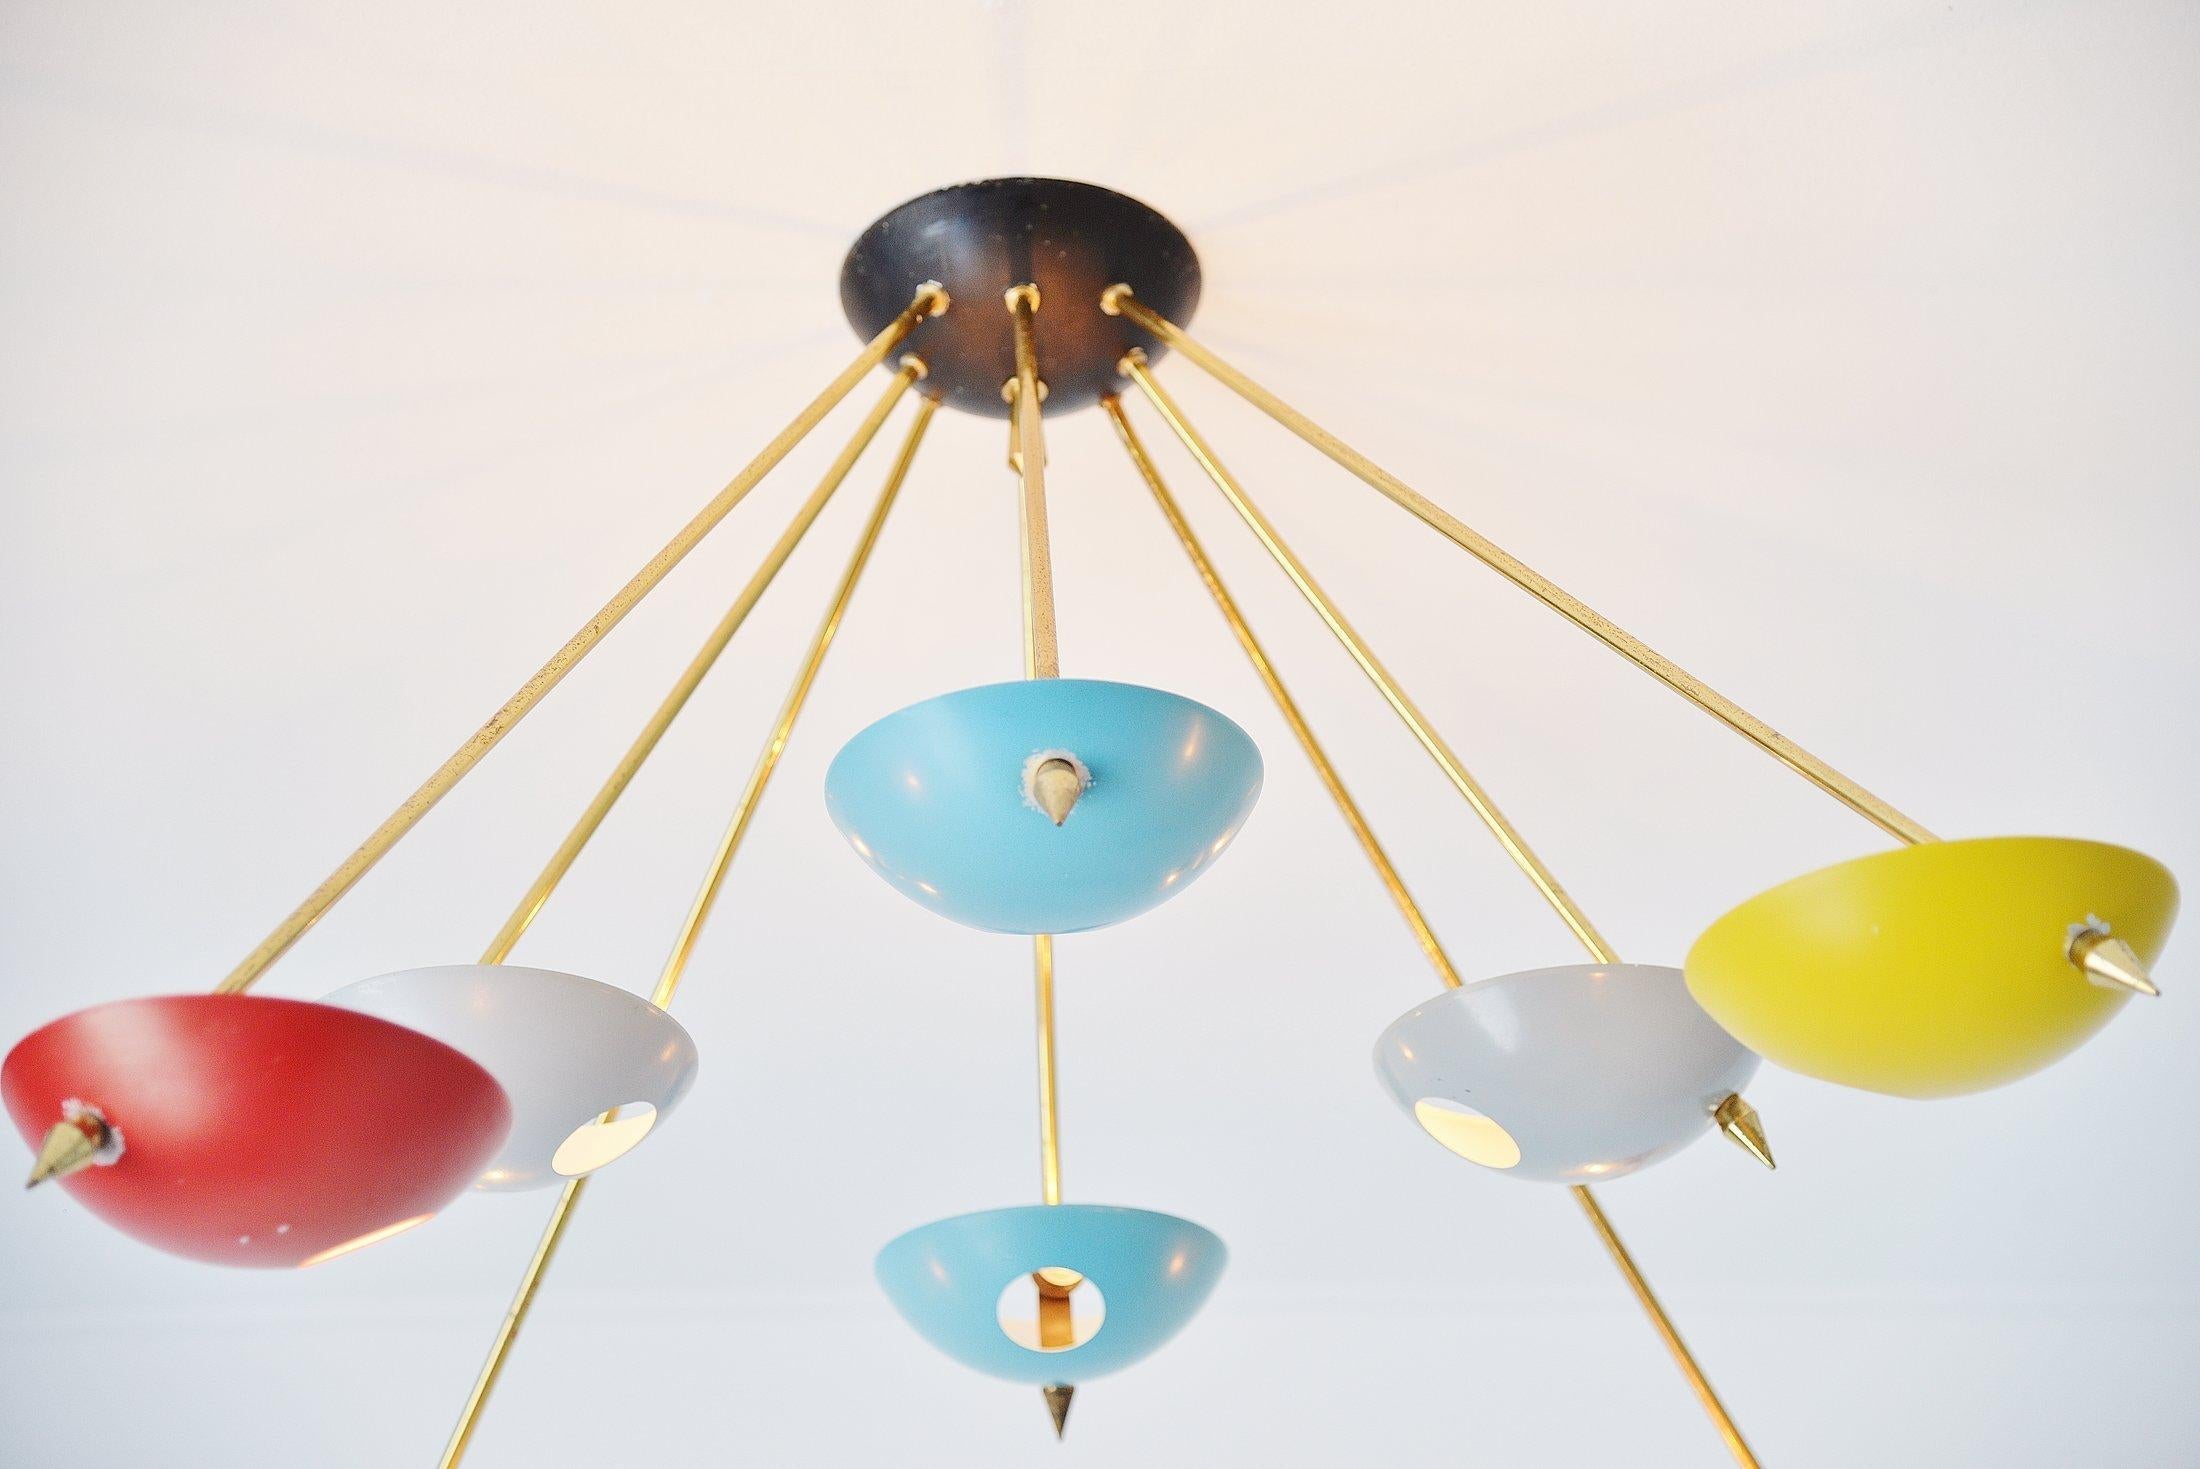 Fantastic Sputnik starburst ceiling lamp designed and manufactured by Stilnovo, Italy, 1950. This lamp was made in the time when the Sputniks were launched into space. Many designers inspired their designs on the space ships. This is in my eyes one